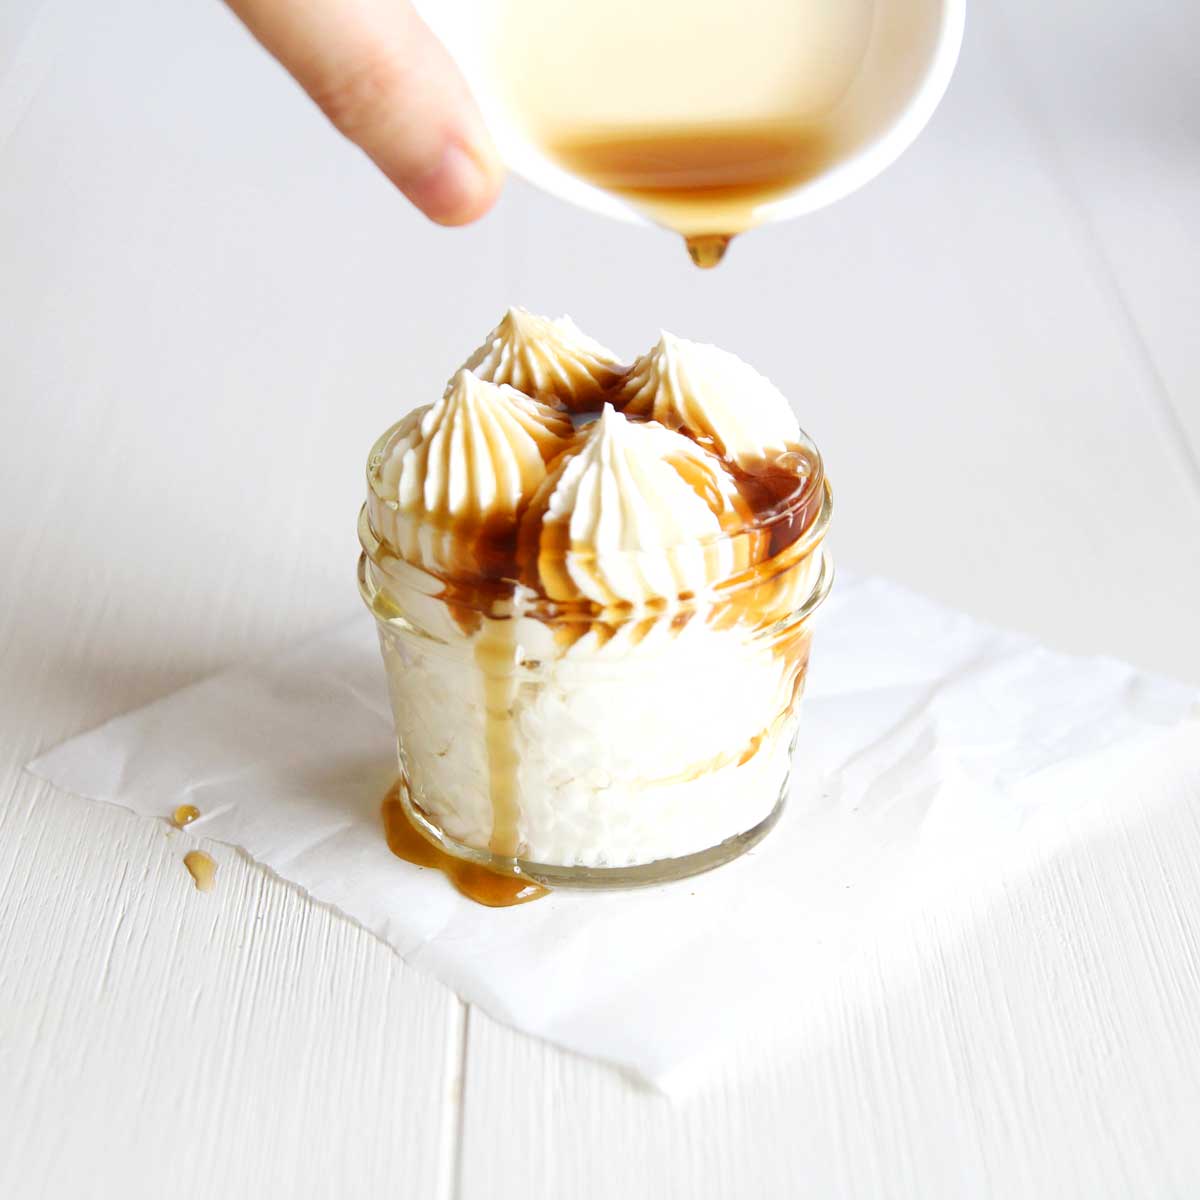 Homemade Maple Whipped Cream that Stays Picture-Perfect for Hours - Brown Sugar Whipped Cream